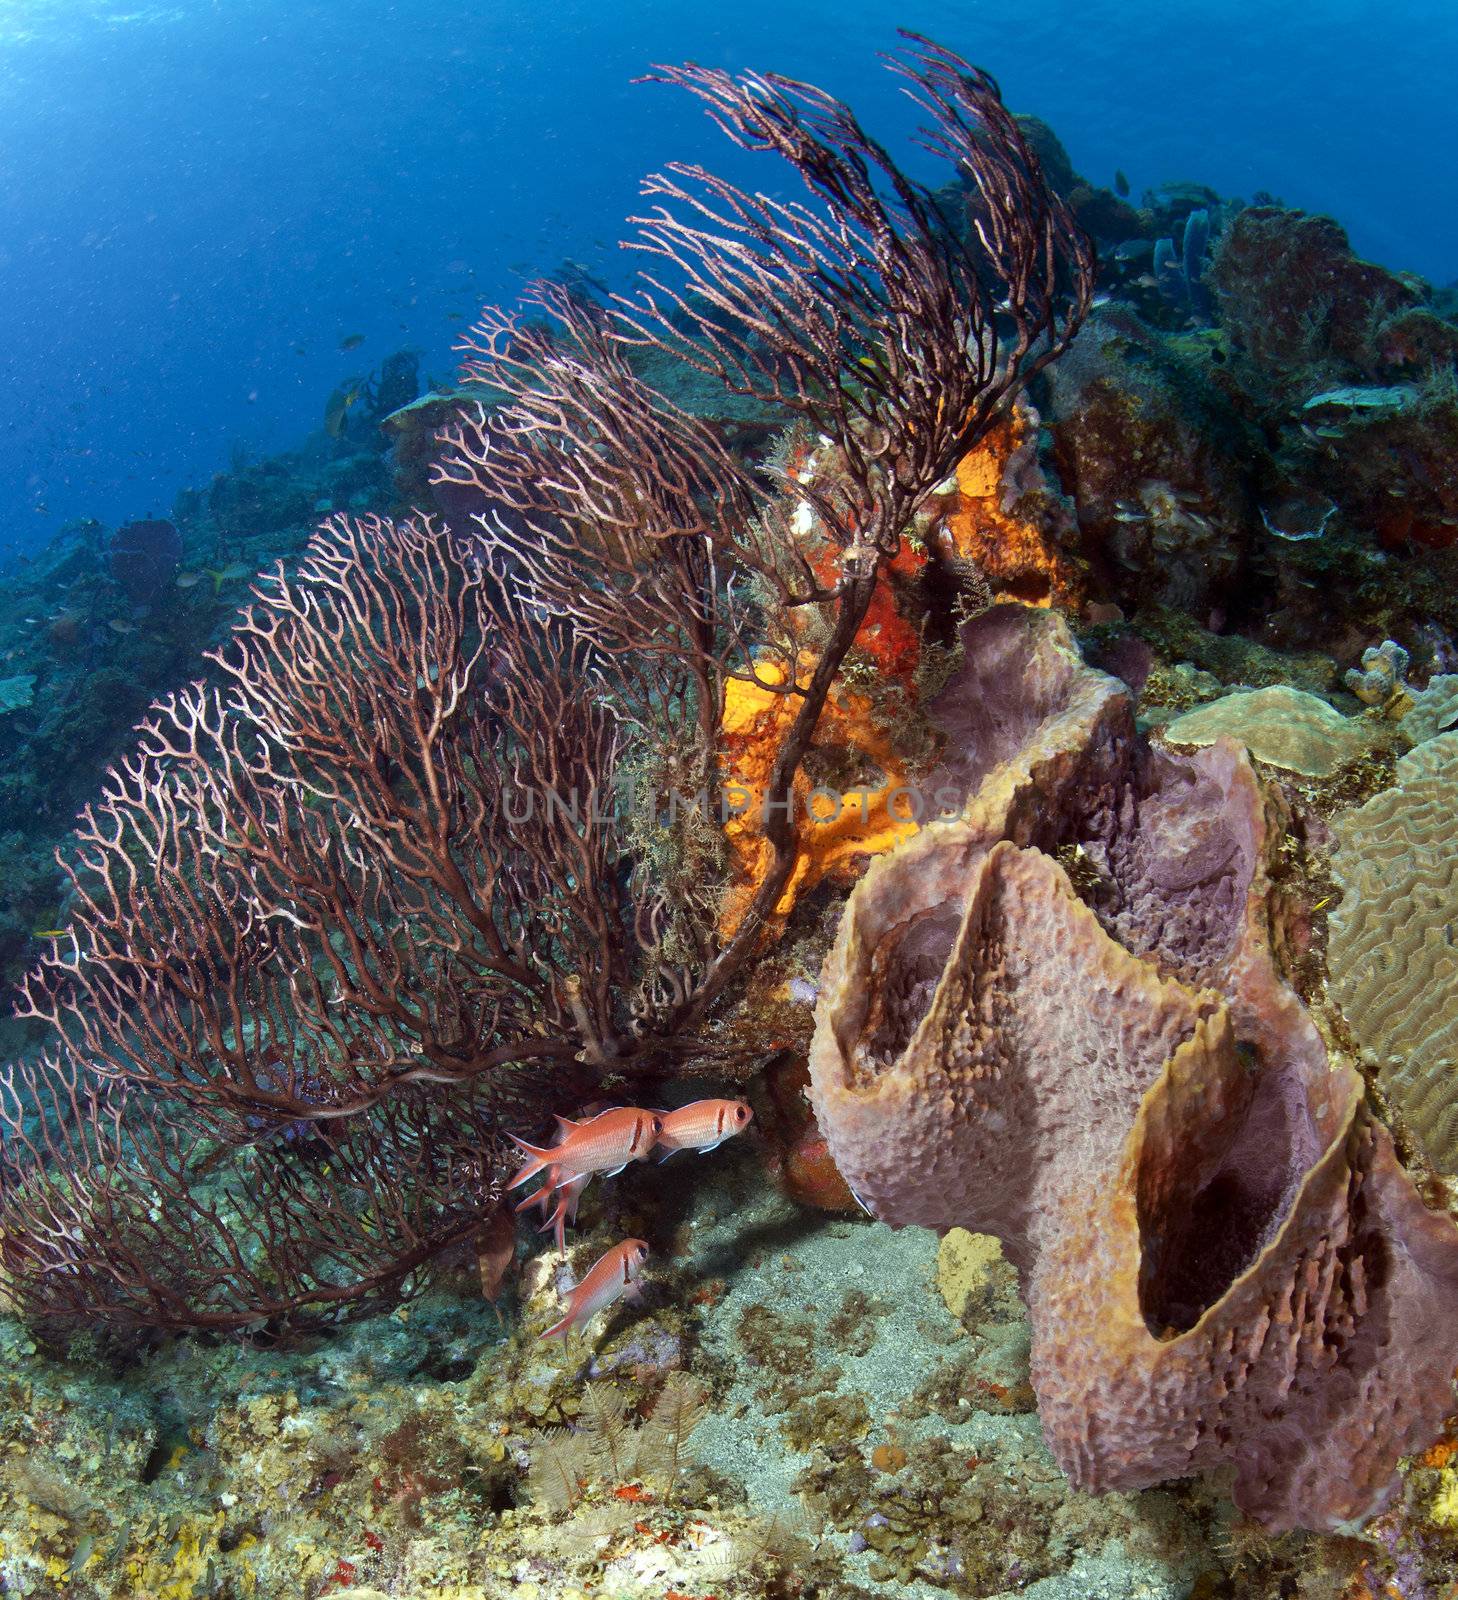 Sponges and Soft Coral in the Caribbean